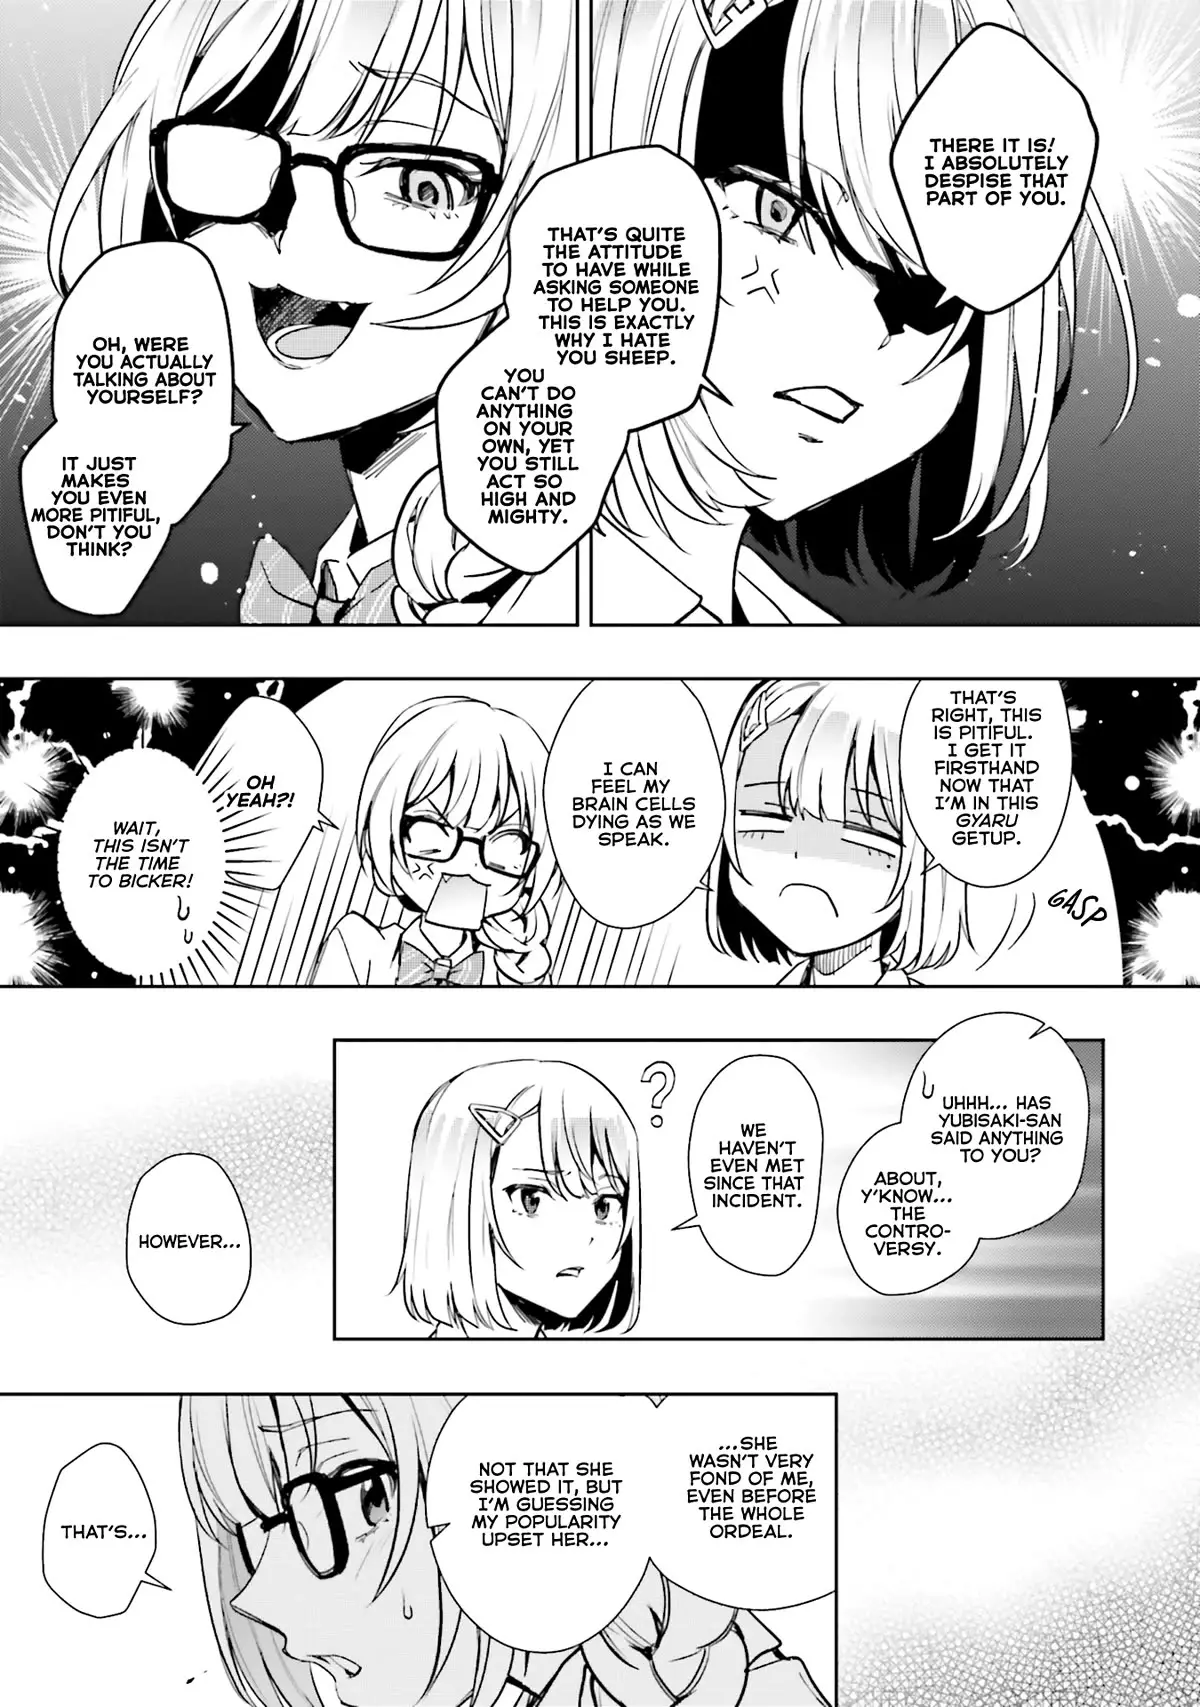 The Two Sides Of Seiyuu Radio - 15 page 5-e6d1cfa9